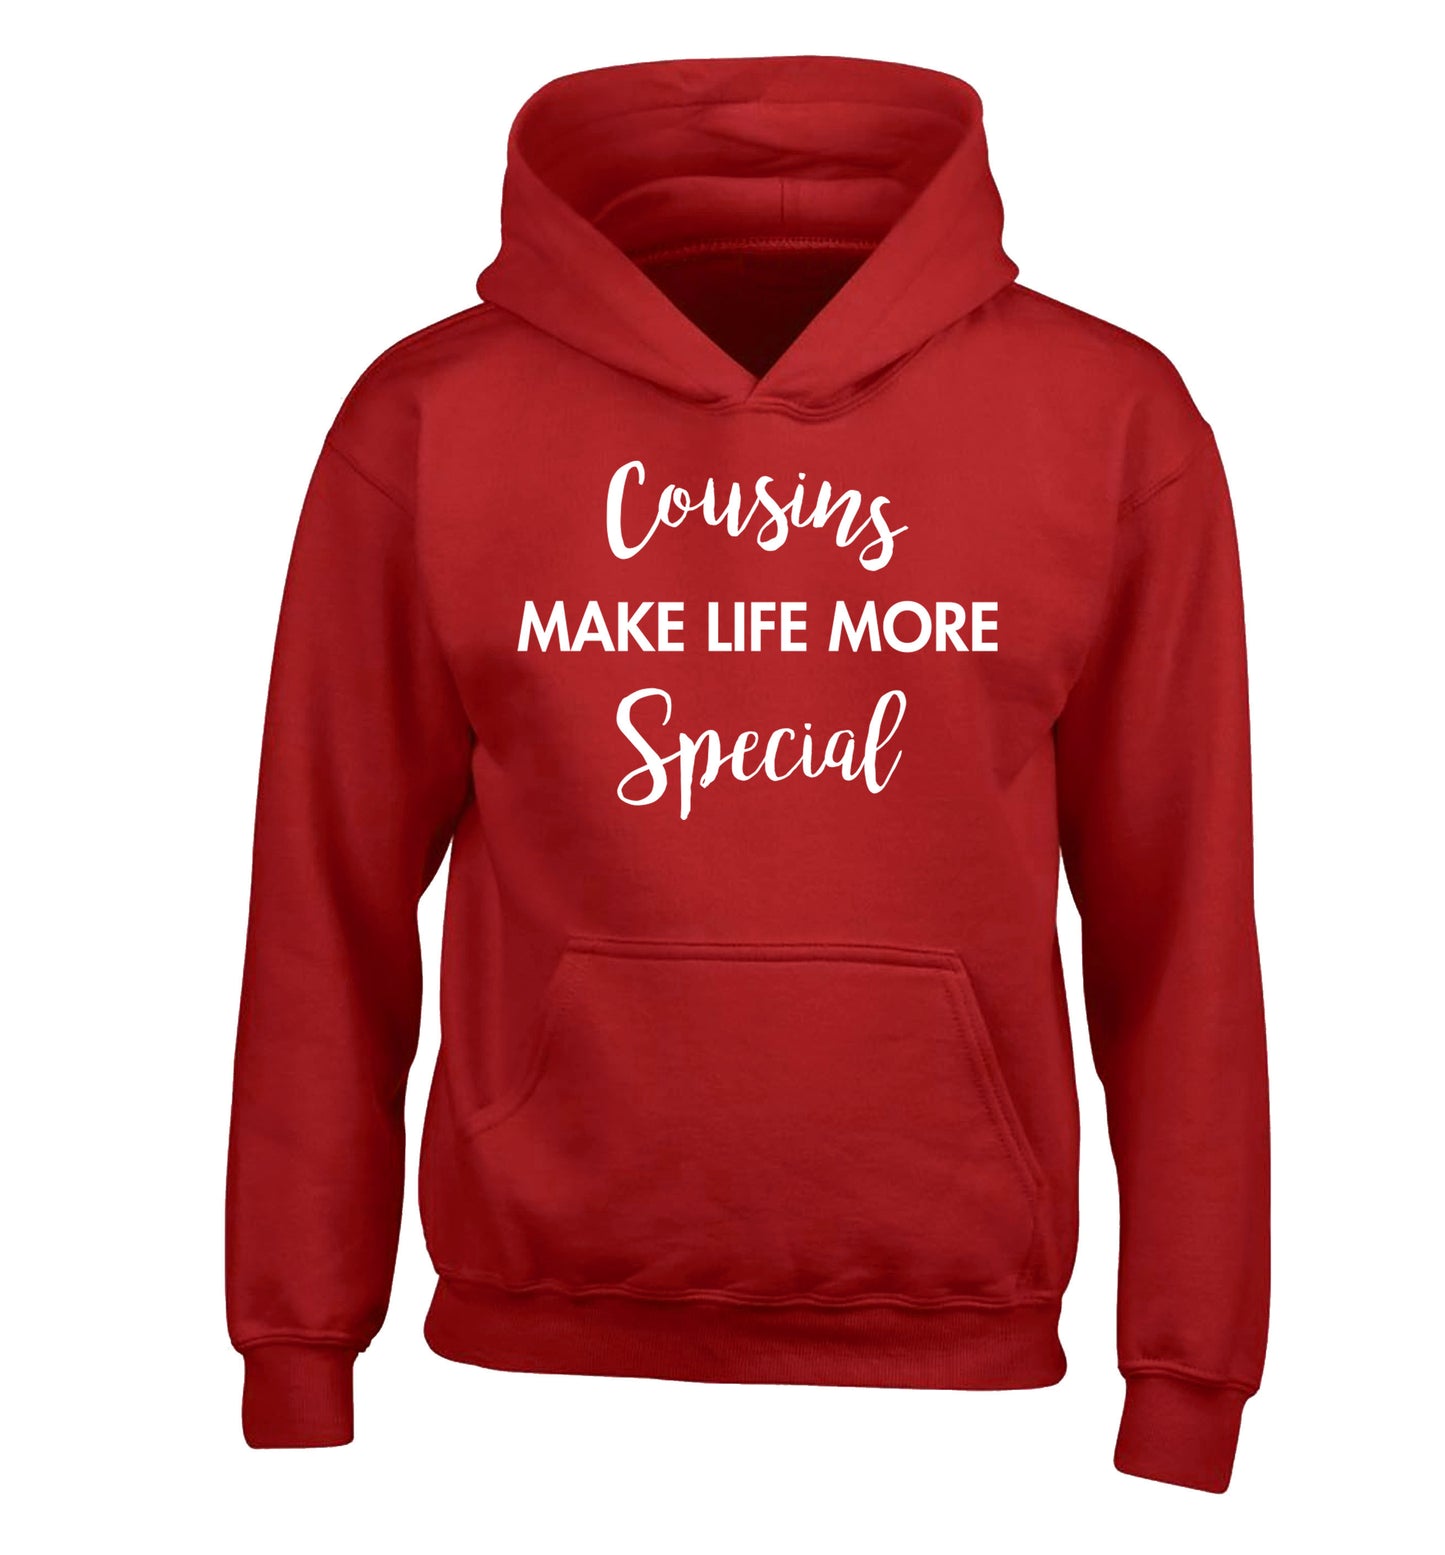 Cousins make life more special children's red hoodie 12-14 Years